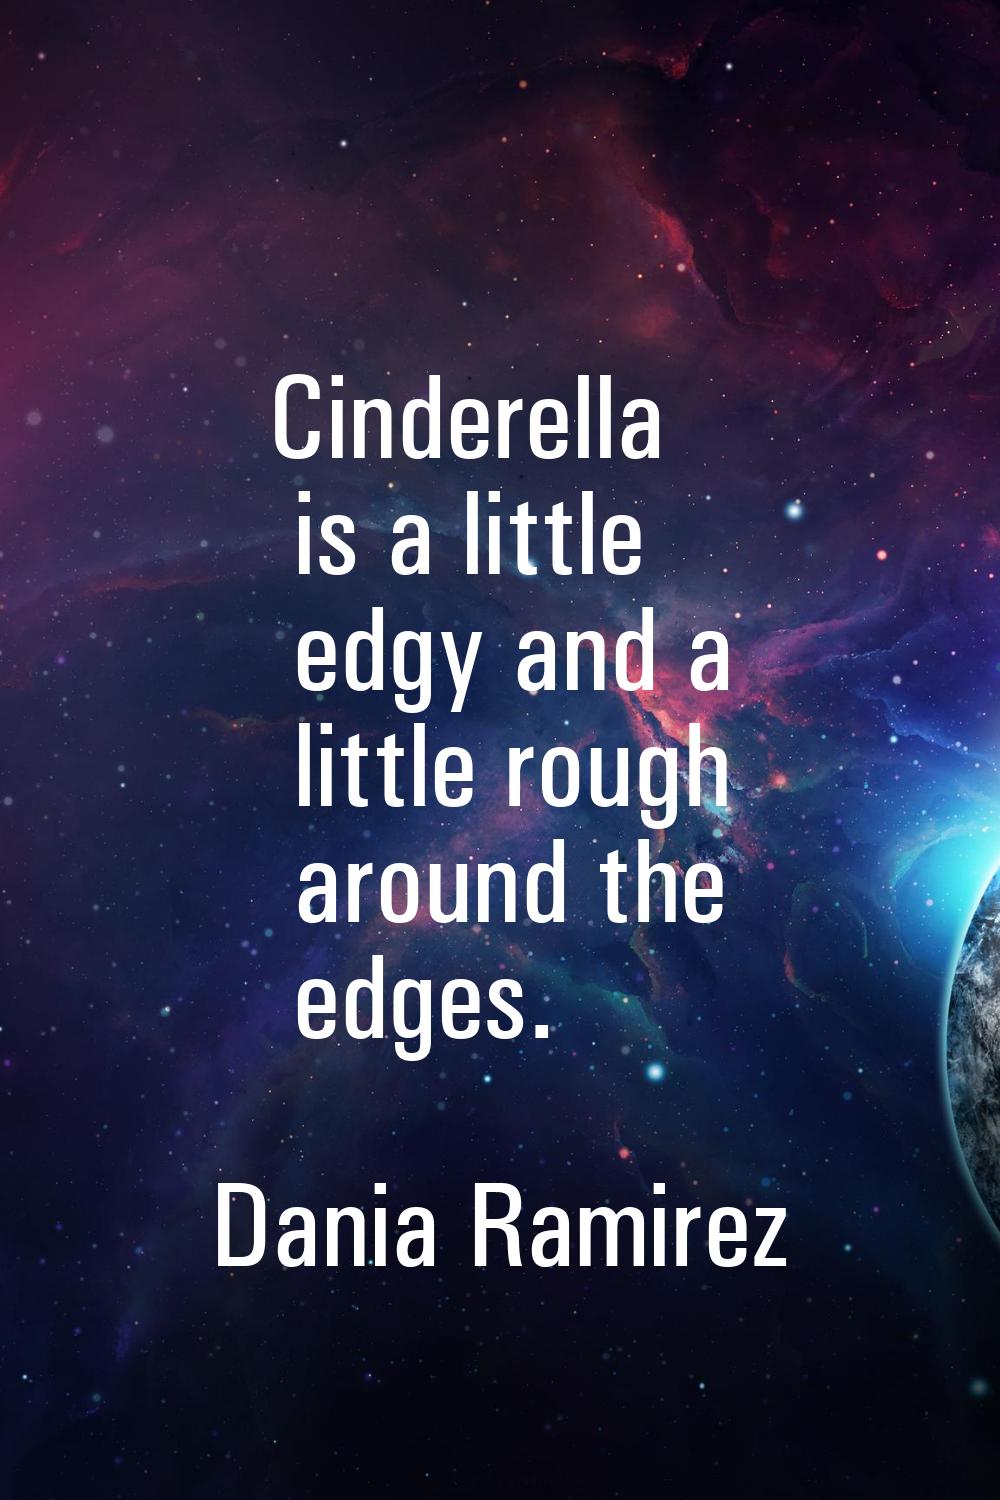 Cinderella is a little edgy and a little rough around the edges.